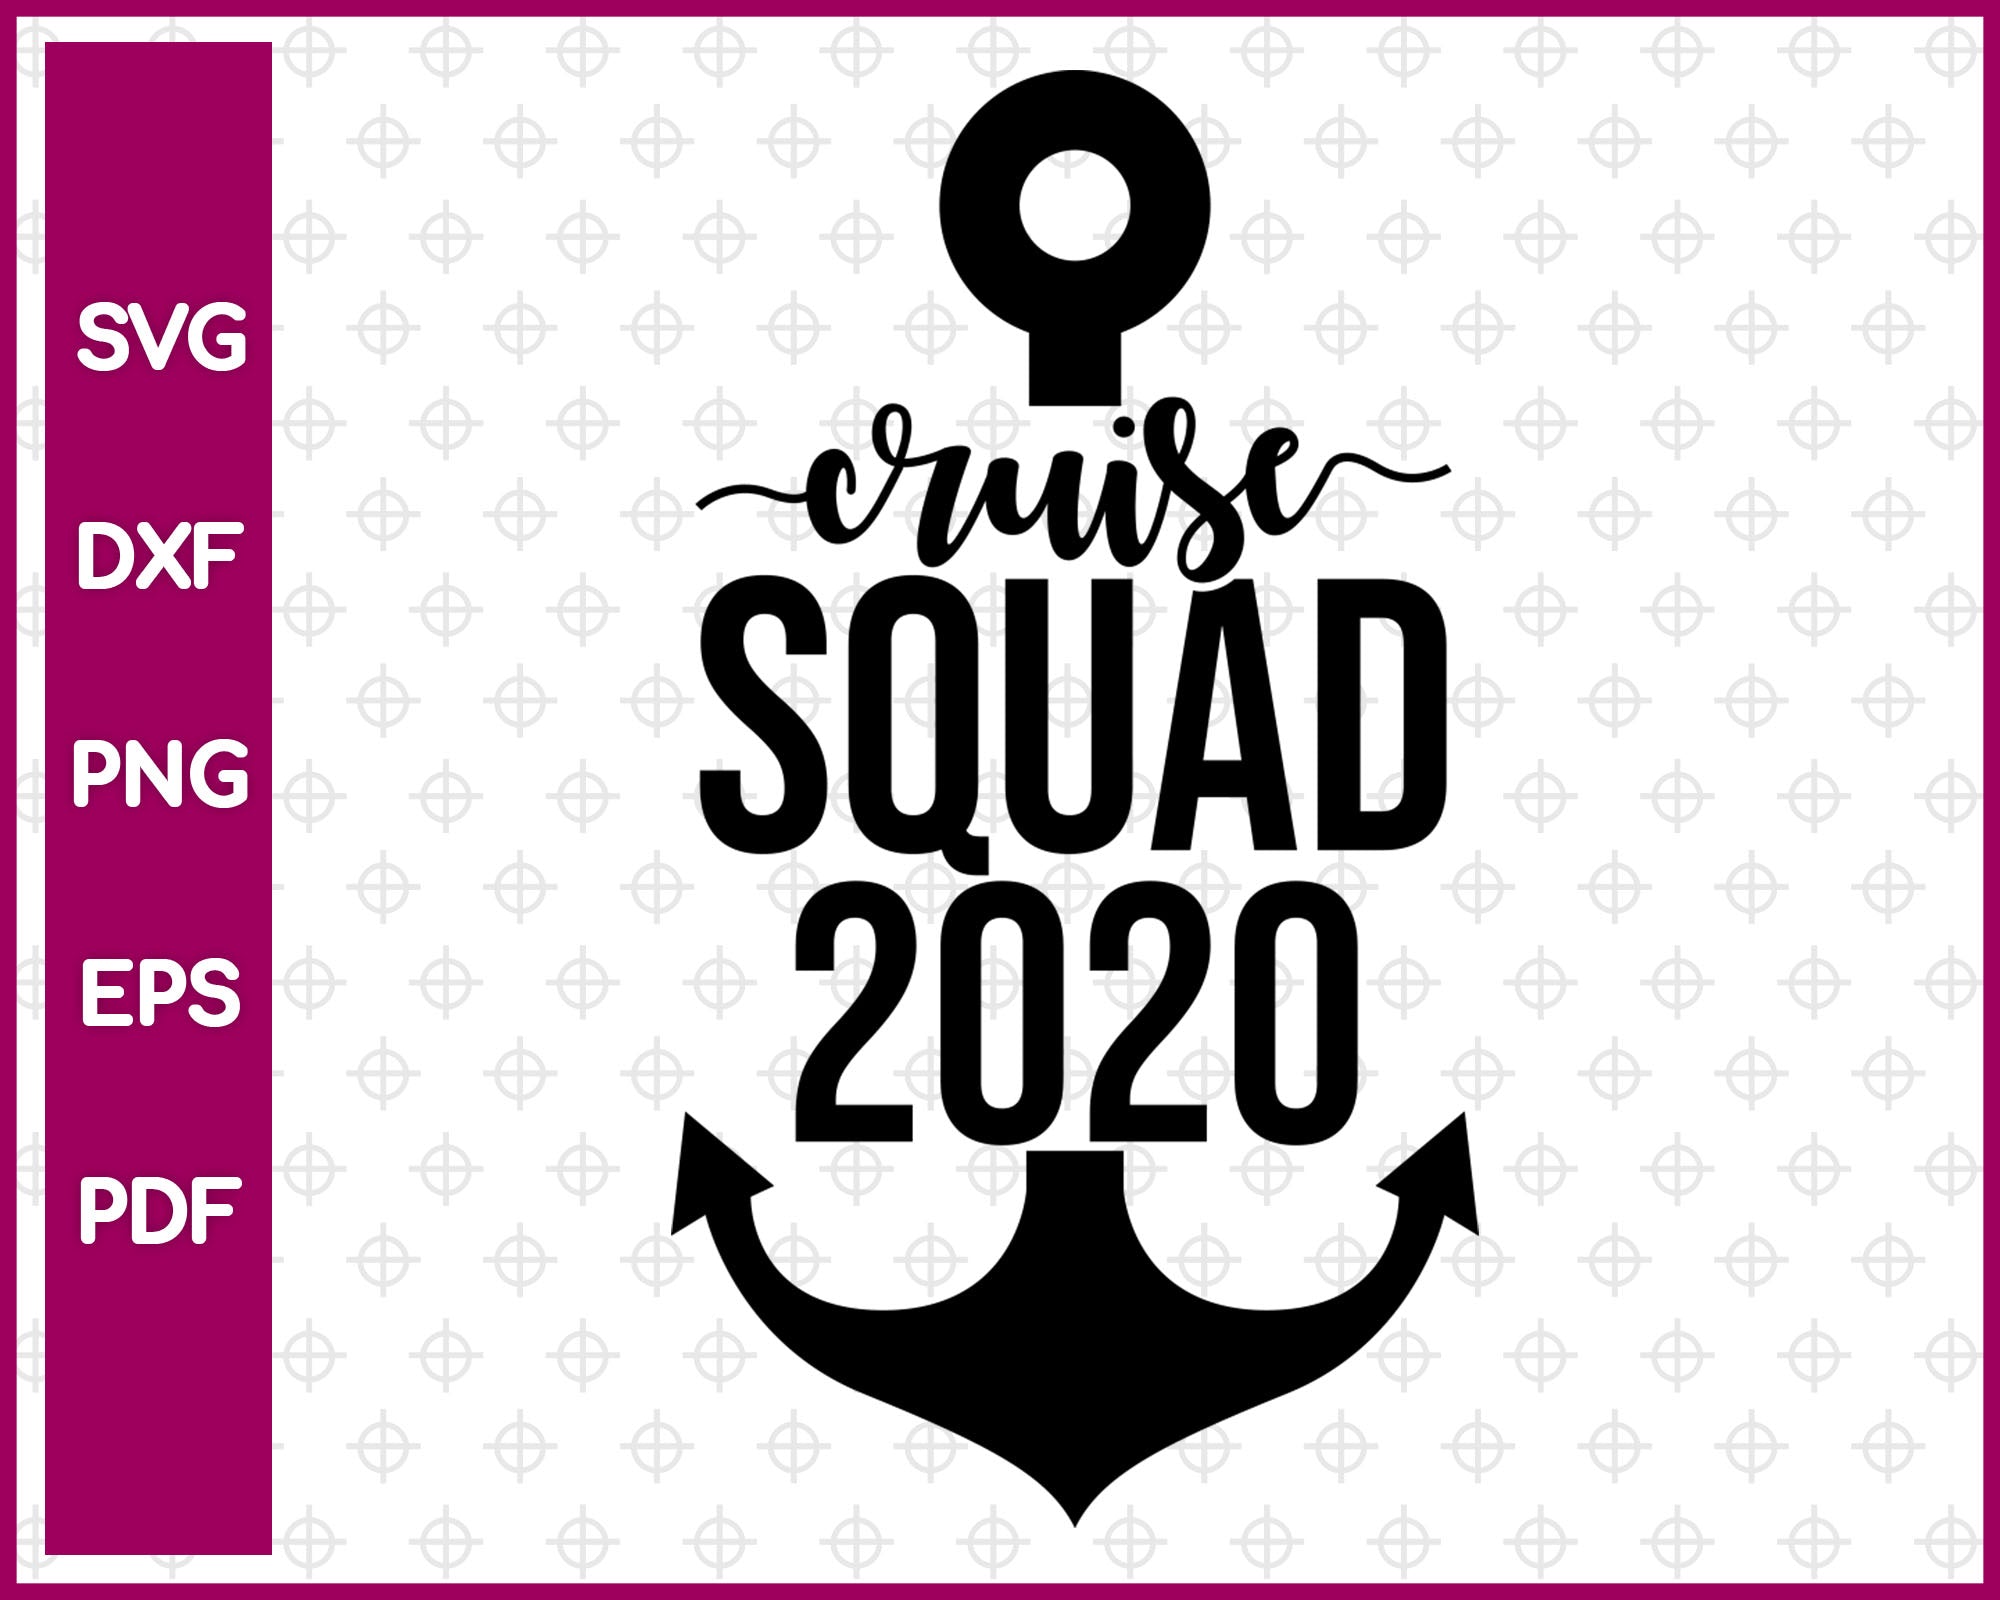 Cruise Squad 2020, Cruise Svg, Travel Svg Dxf Png Eps Pdf Printable Files